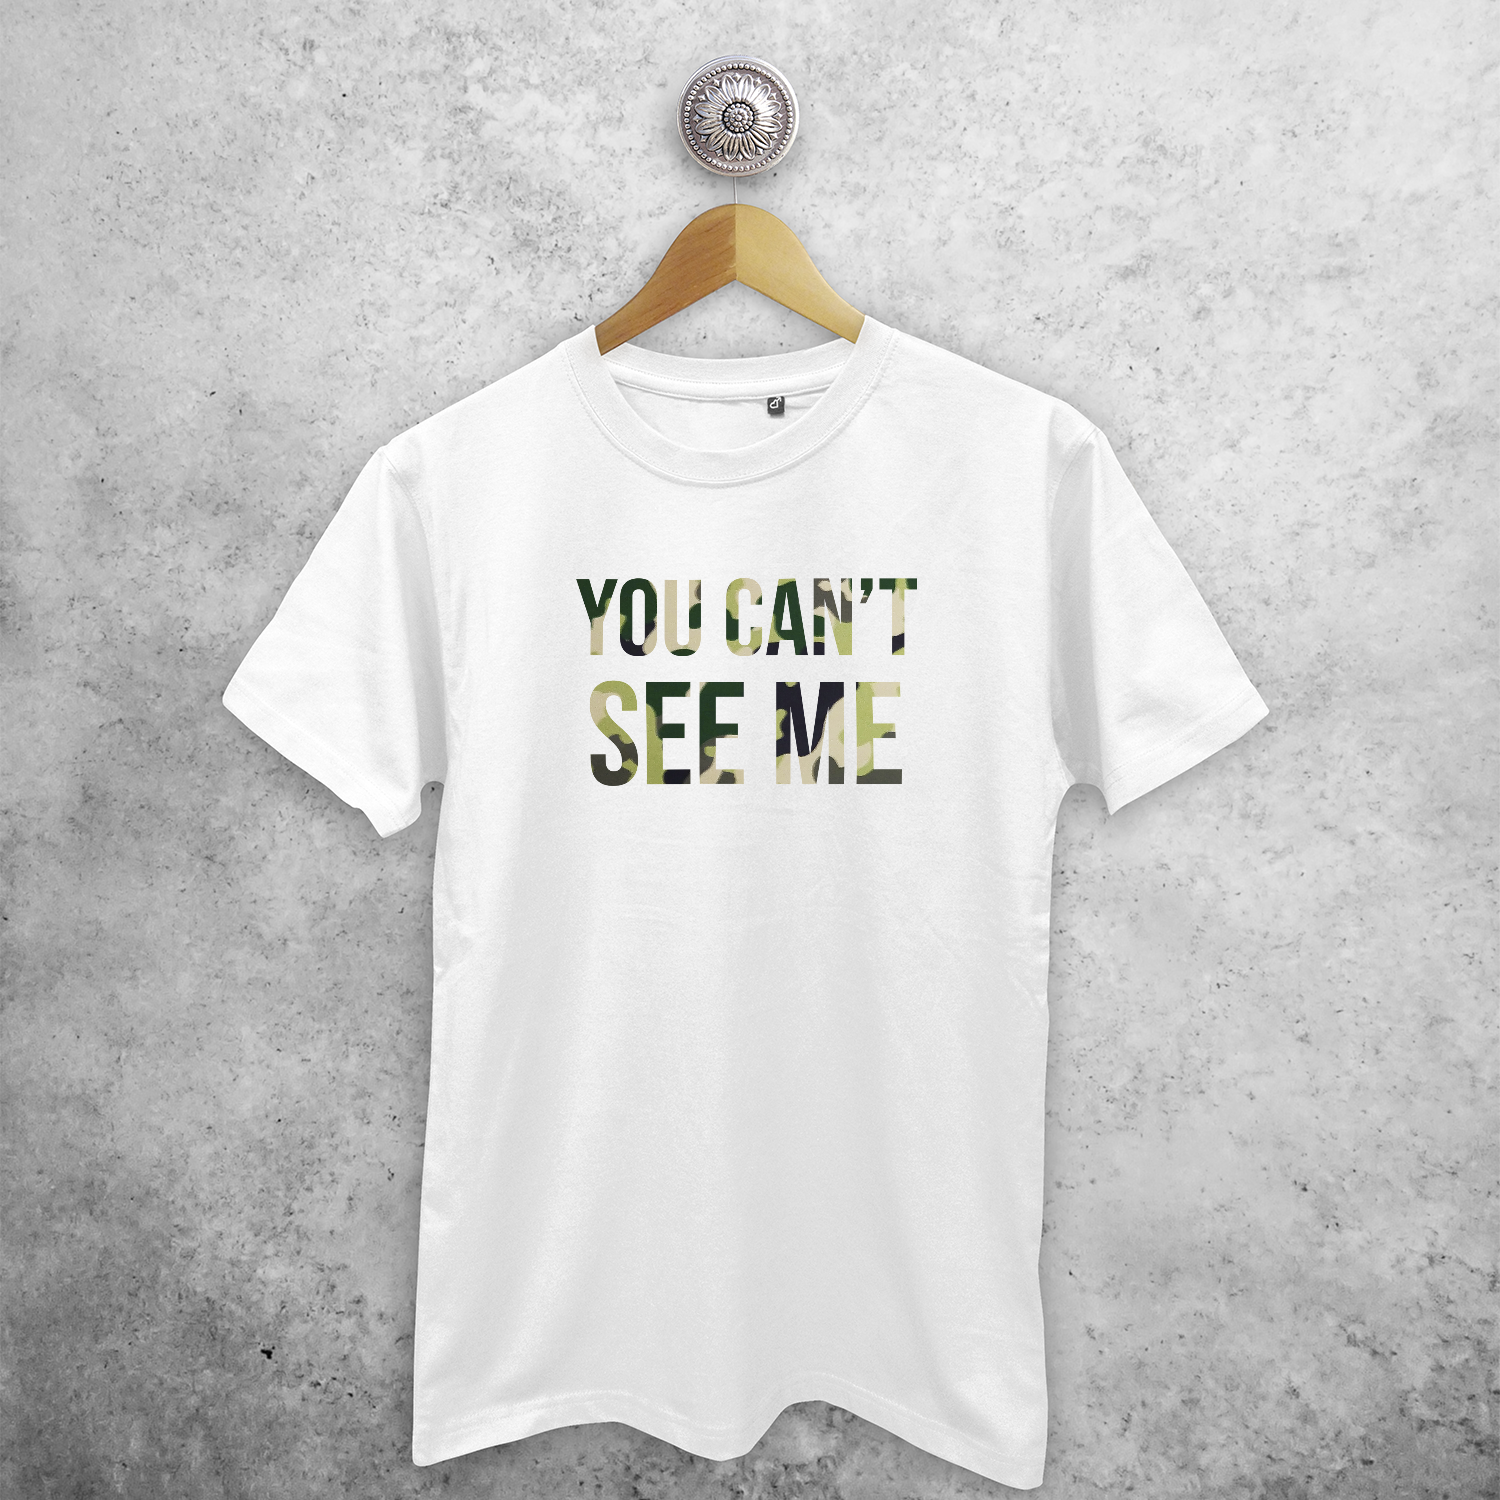 'You can't see me' adult shirt